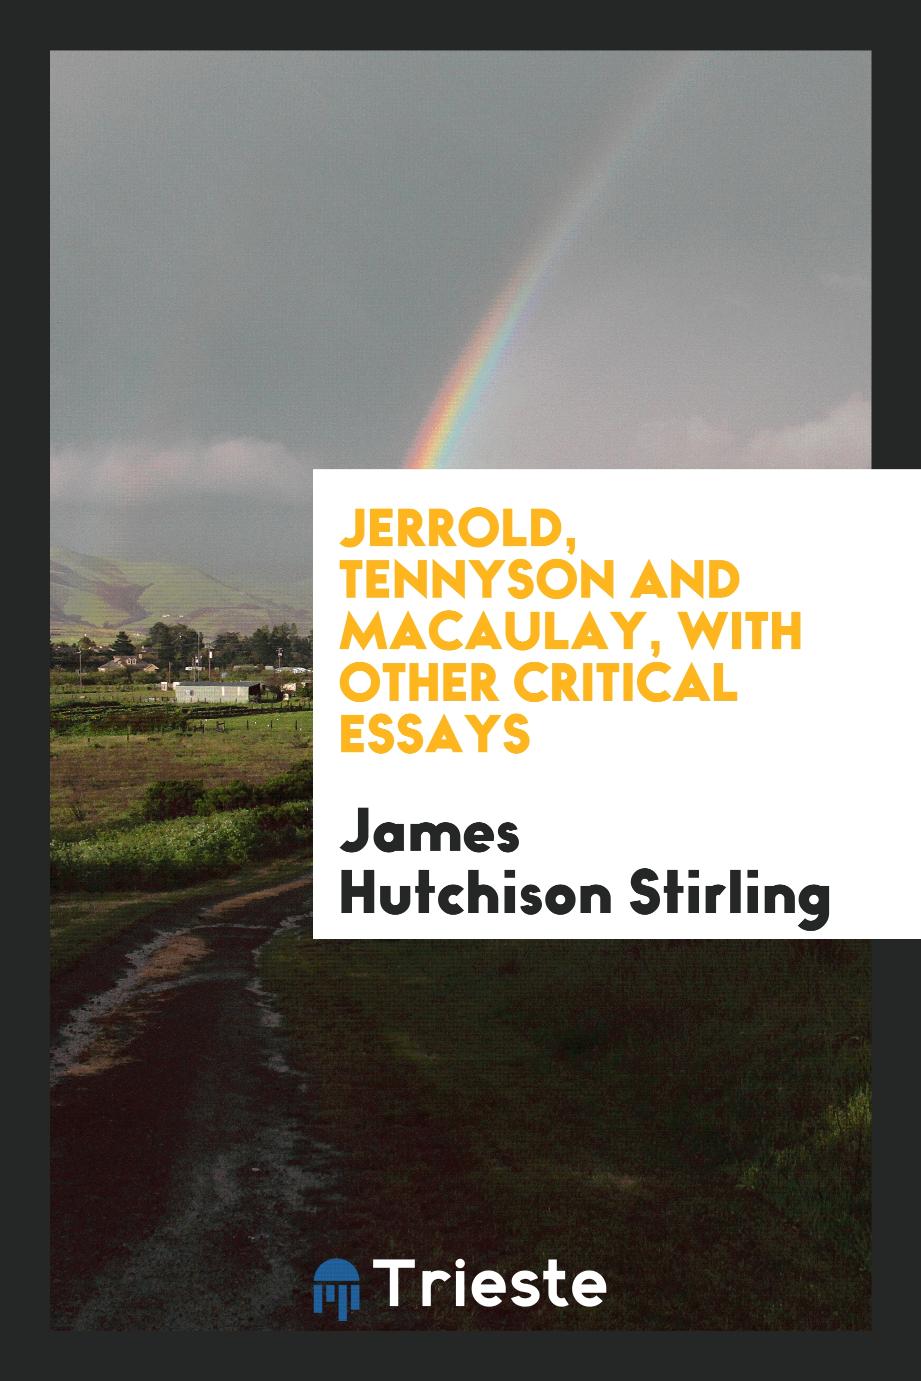 Jerrold, Tennyson and Macaulay, with other critical essays